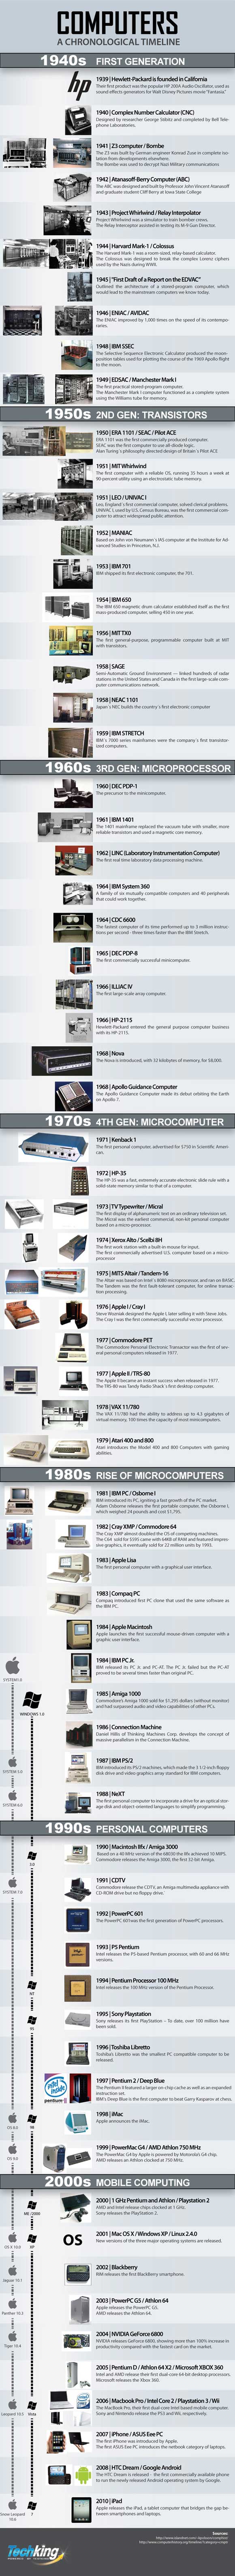 Infographic: A Comprehensive History of Computers